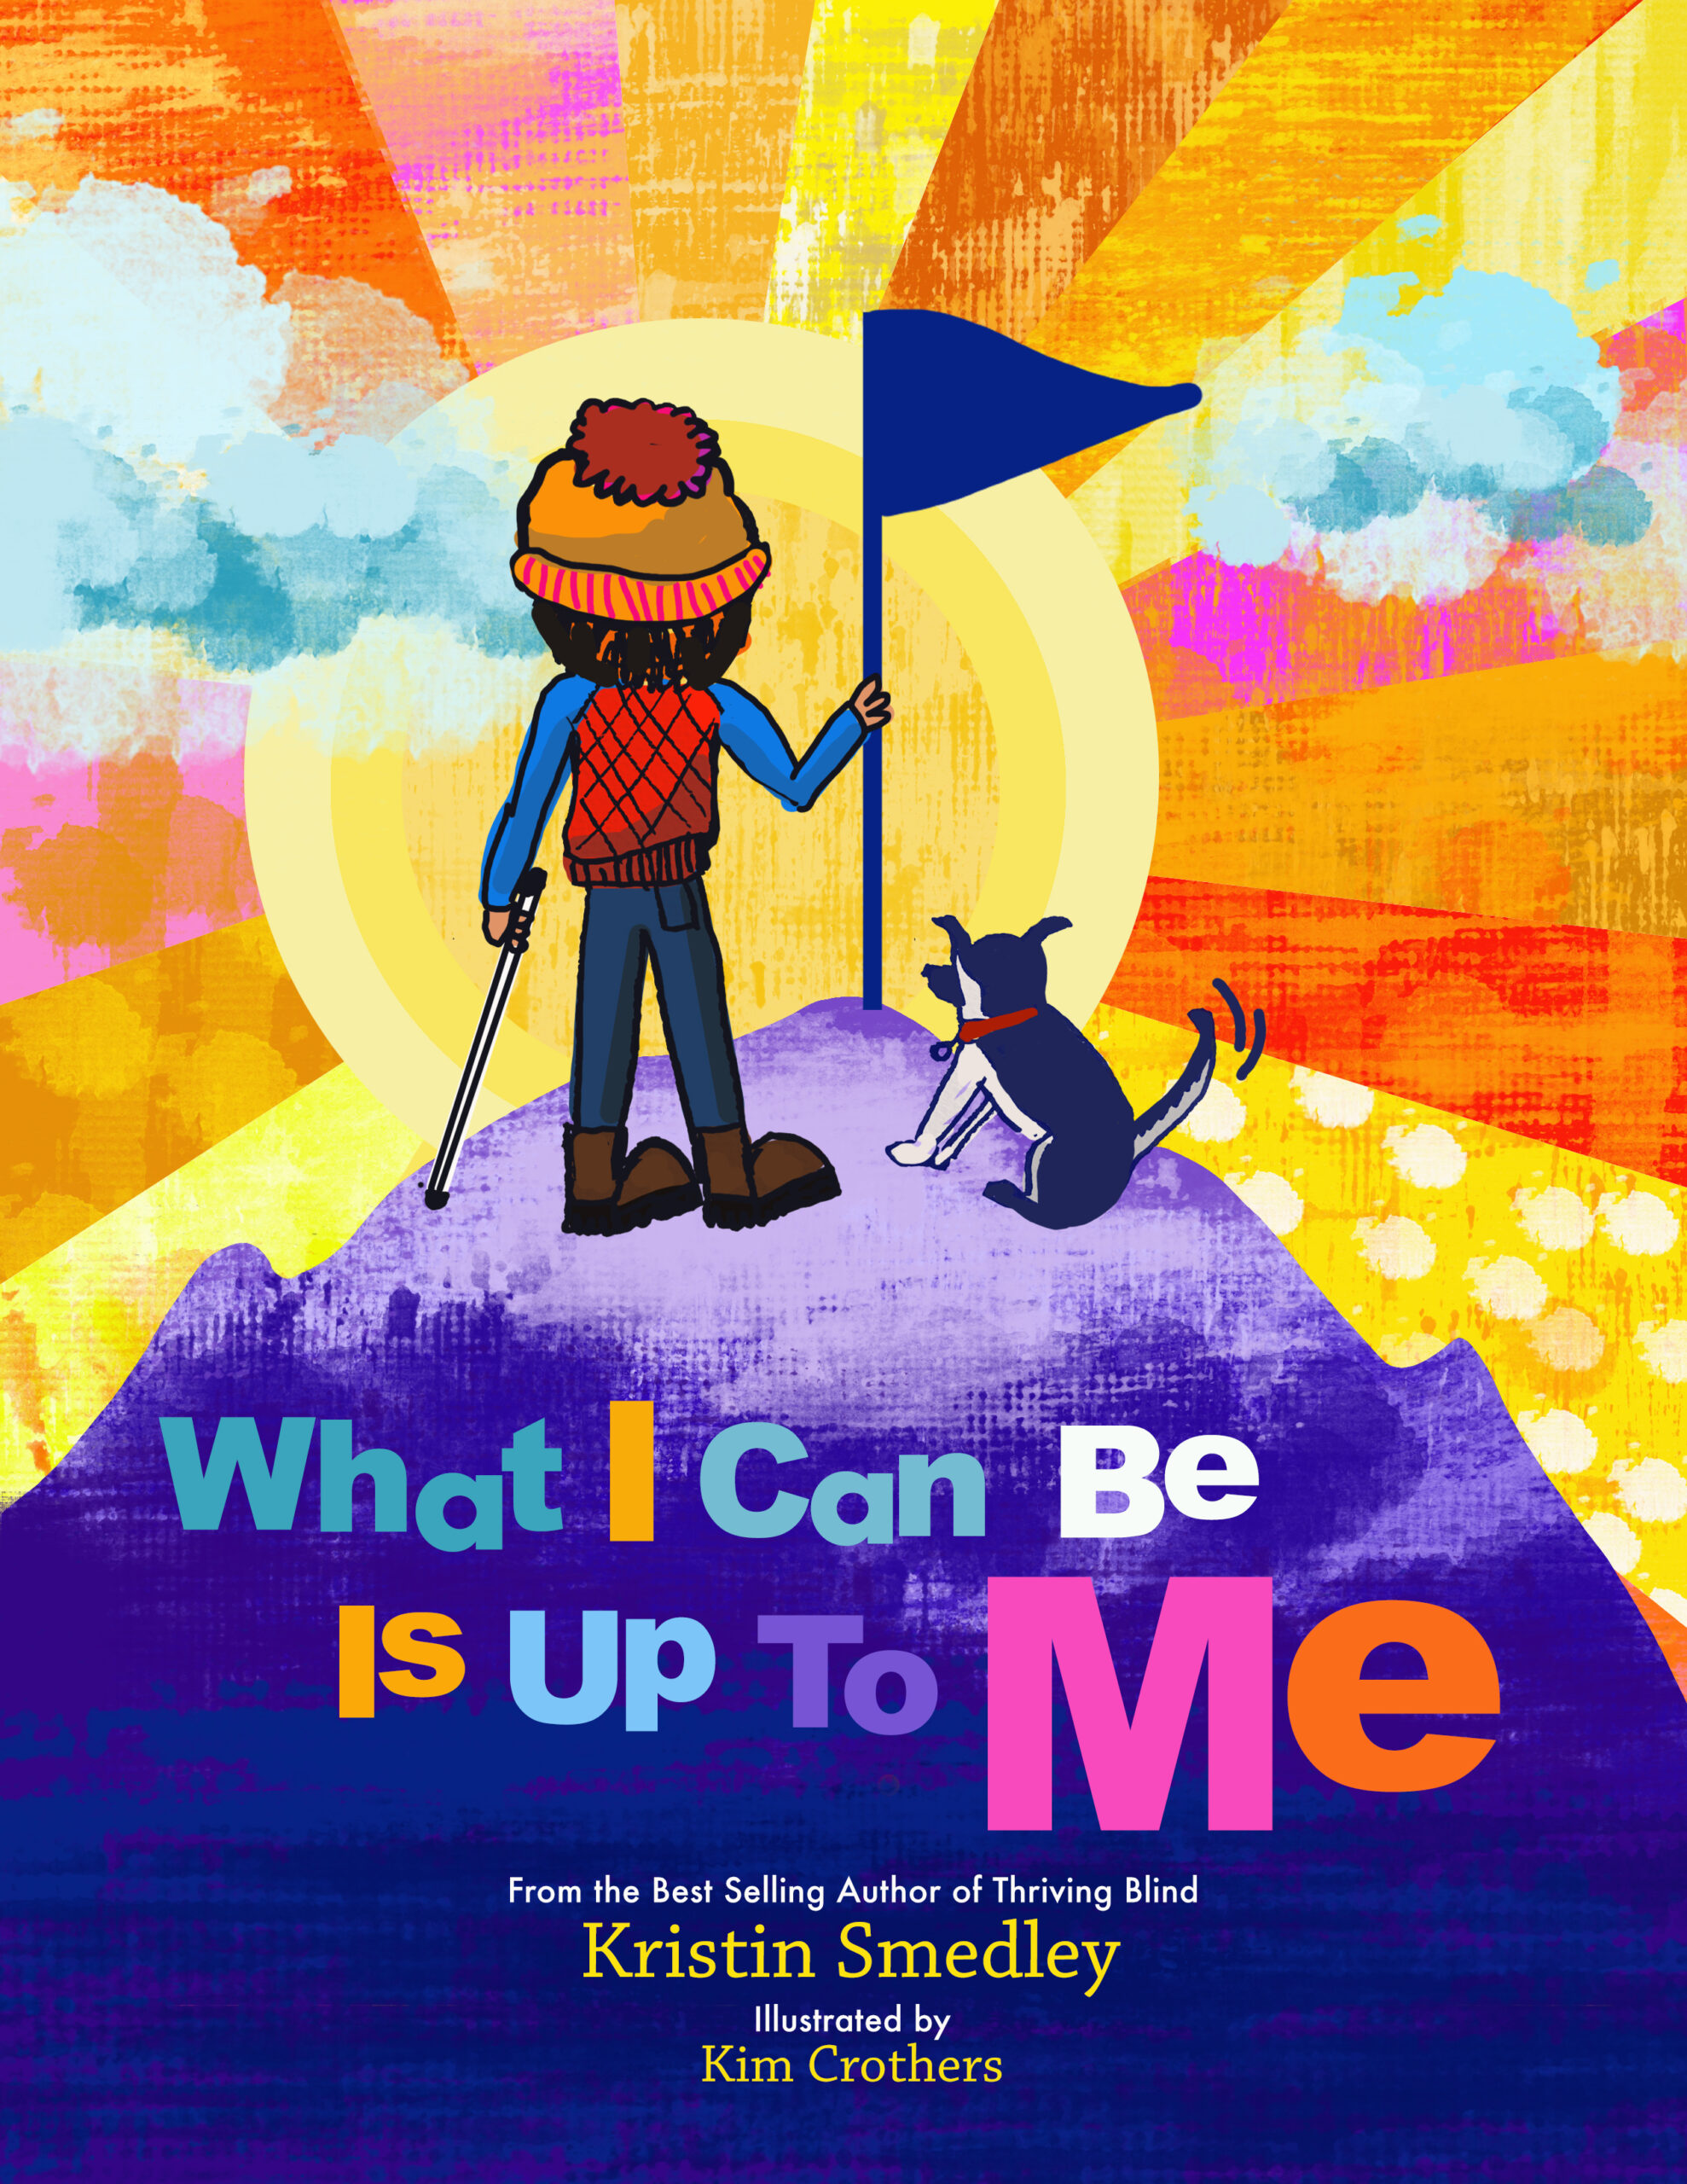 Cover of What I Can Be IS Up To Me children's book